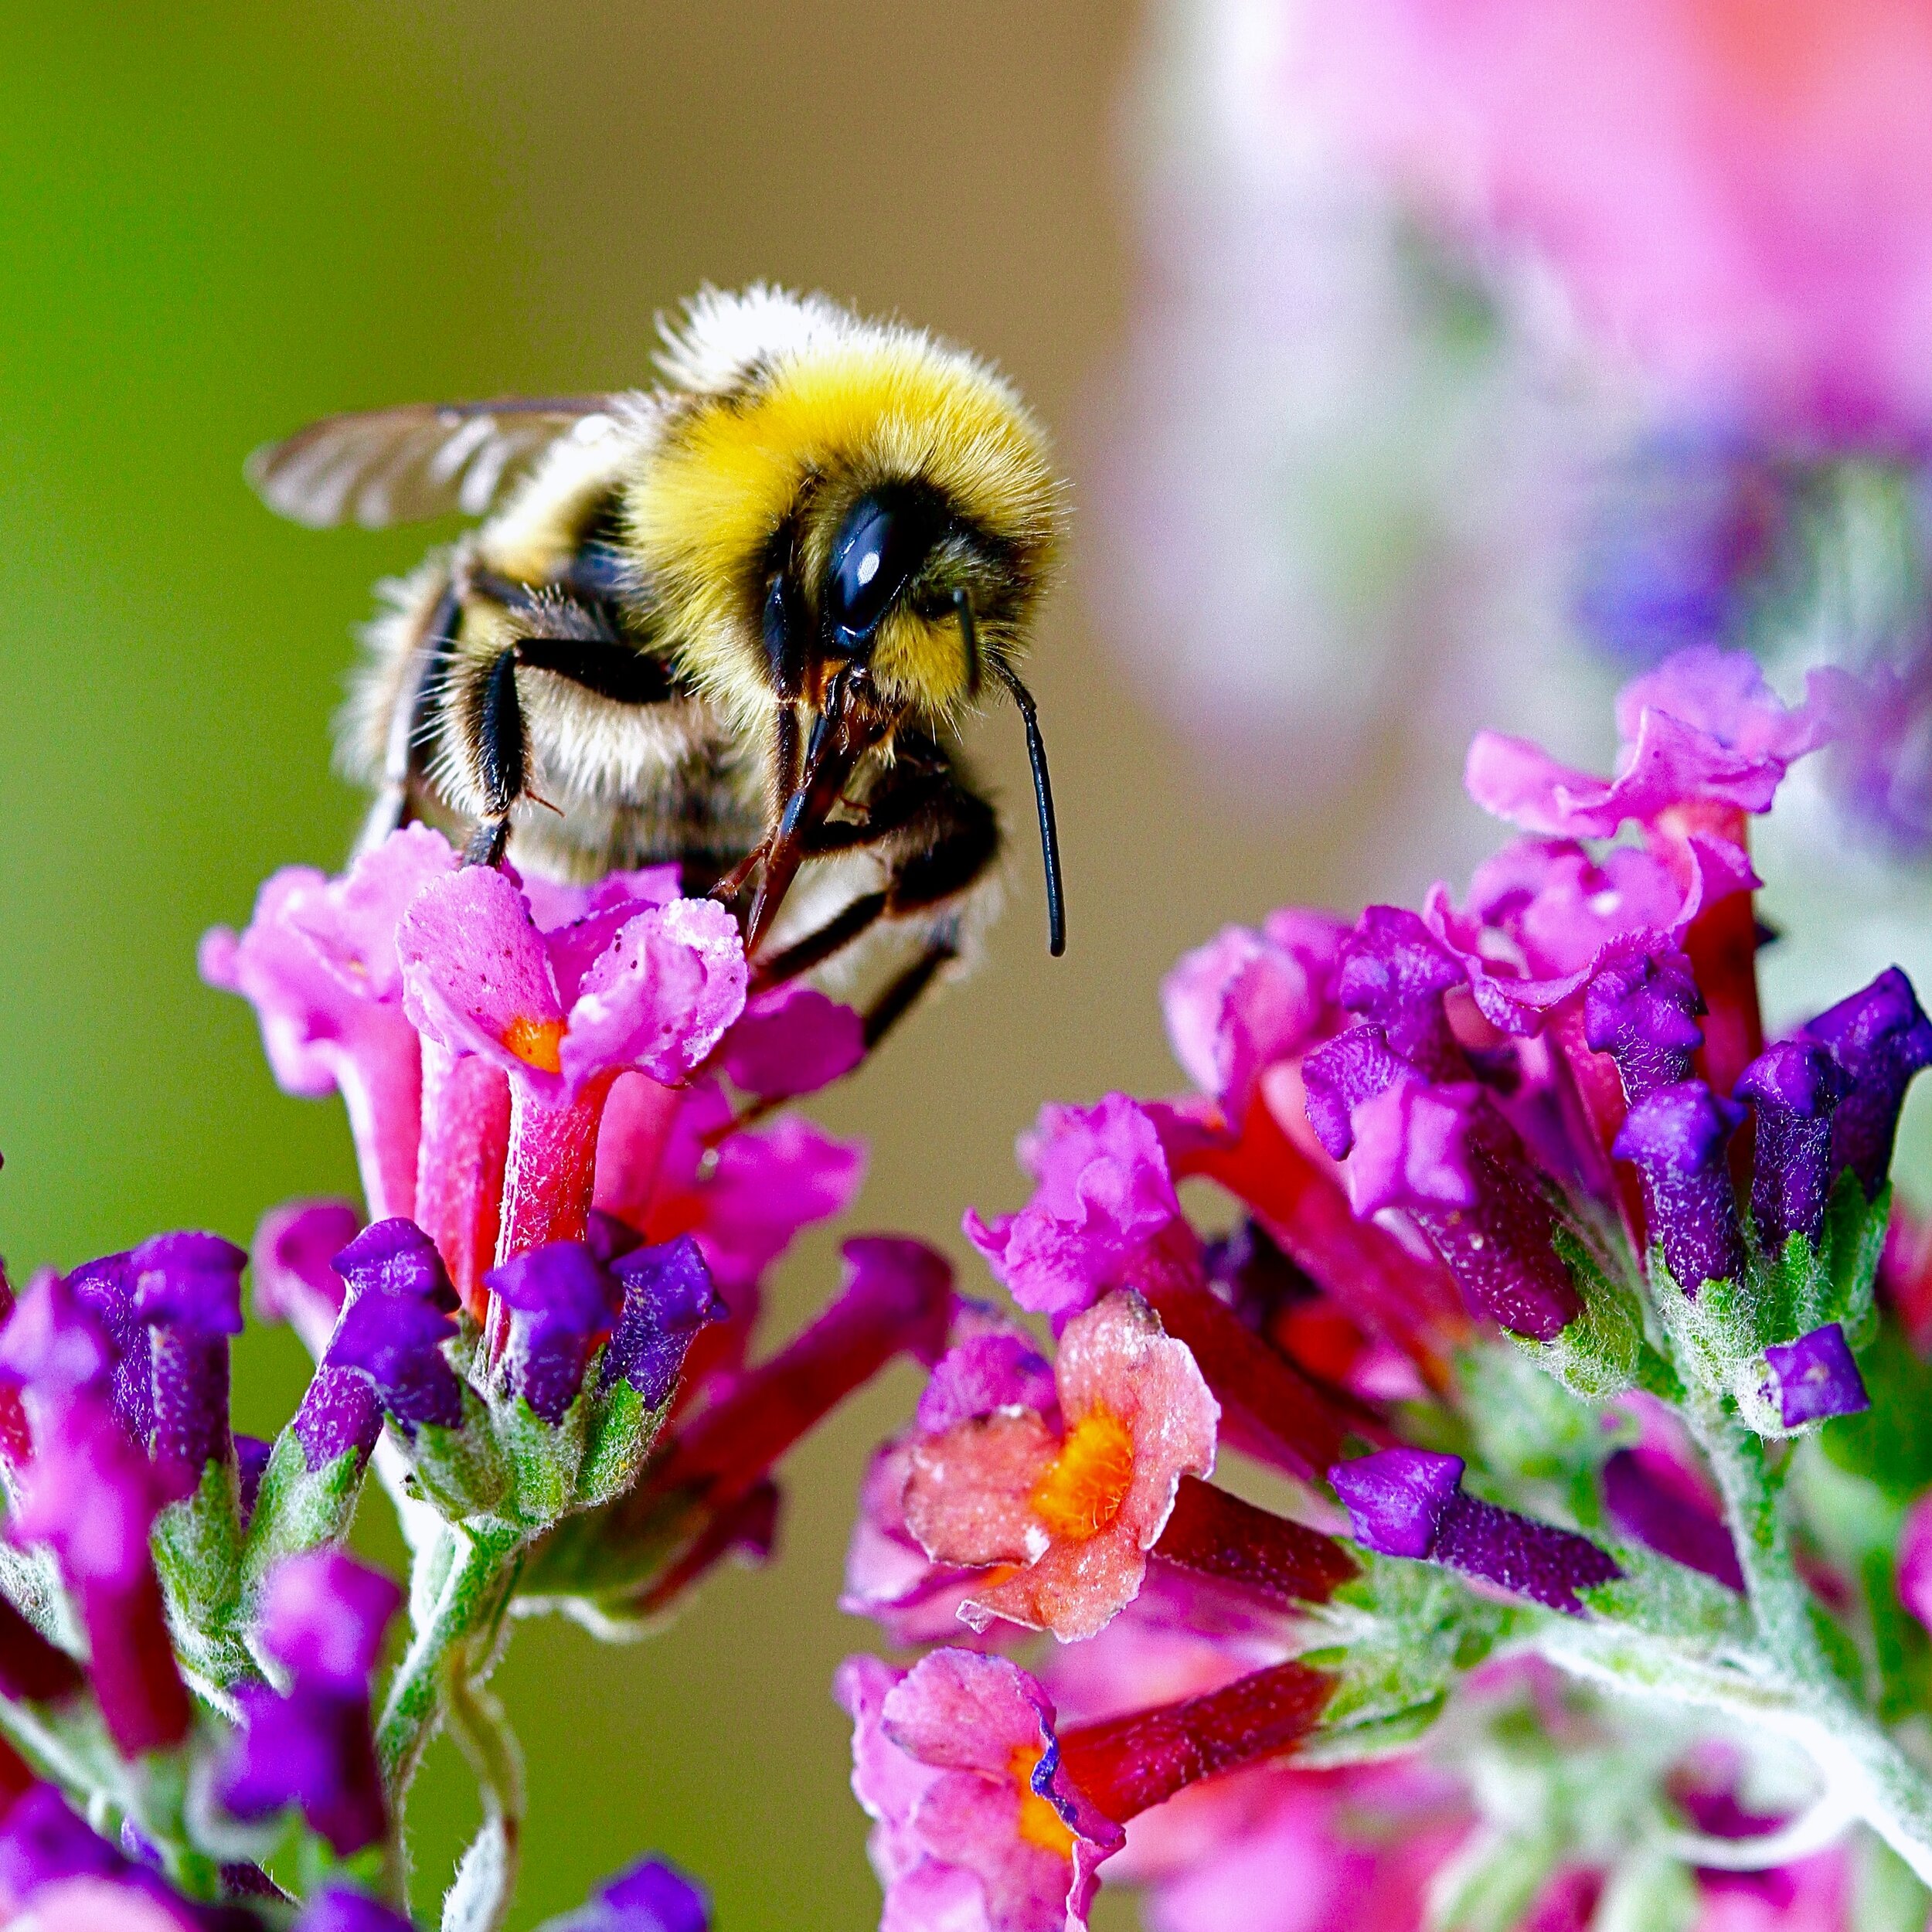  Bees and flowering plants started their love affair about 140 million years ago and have been modifying each other's behavior and appearance ever since. 